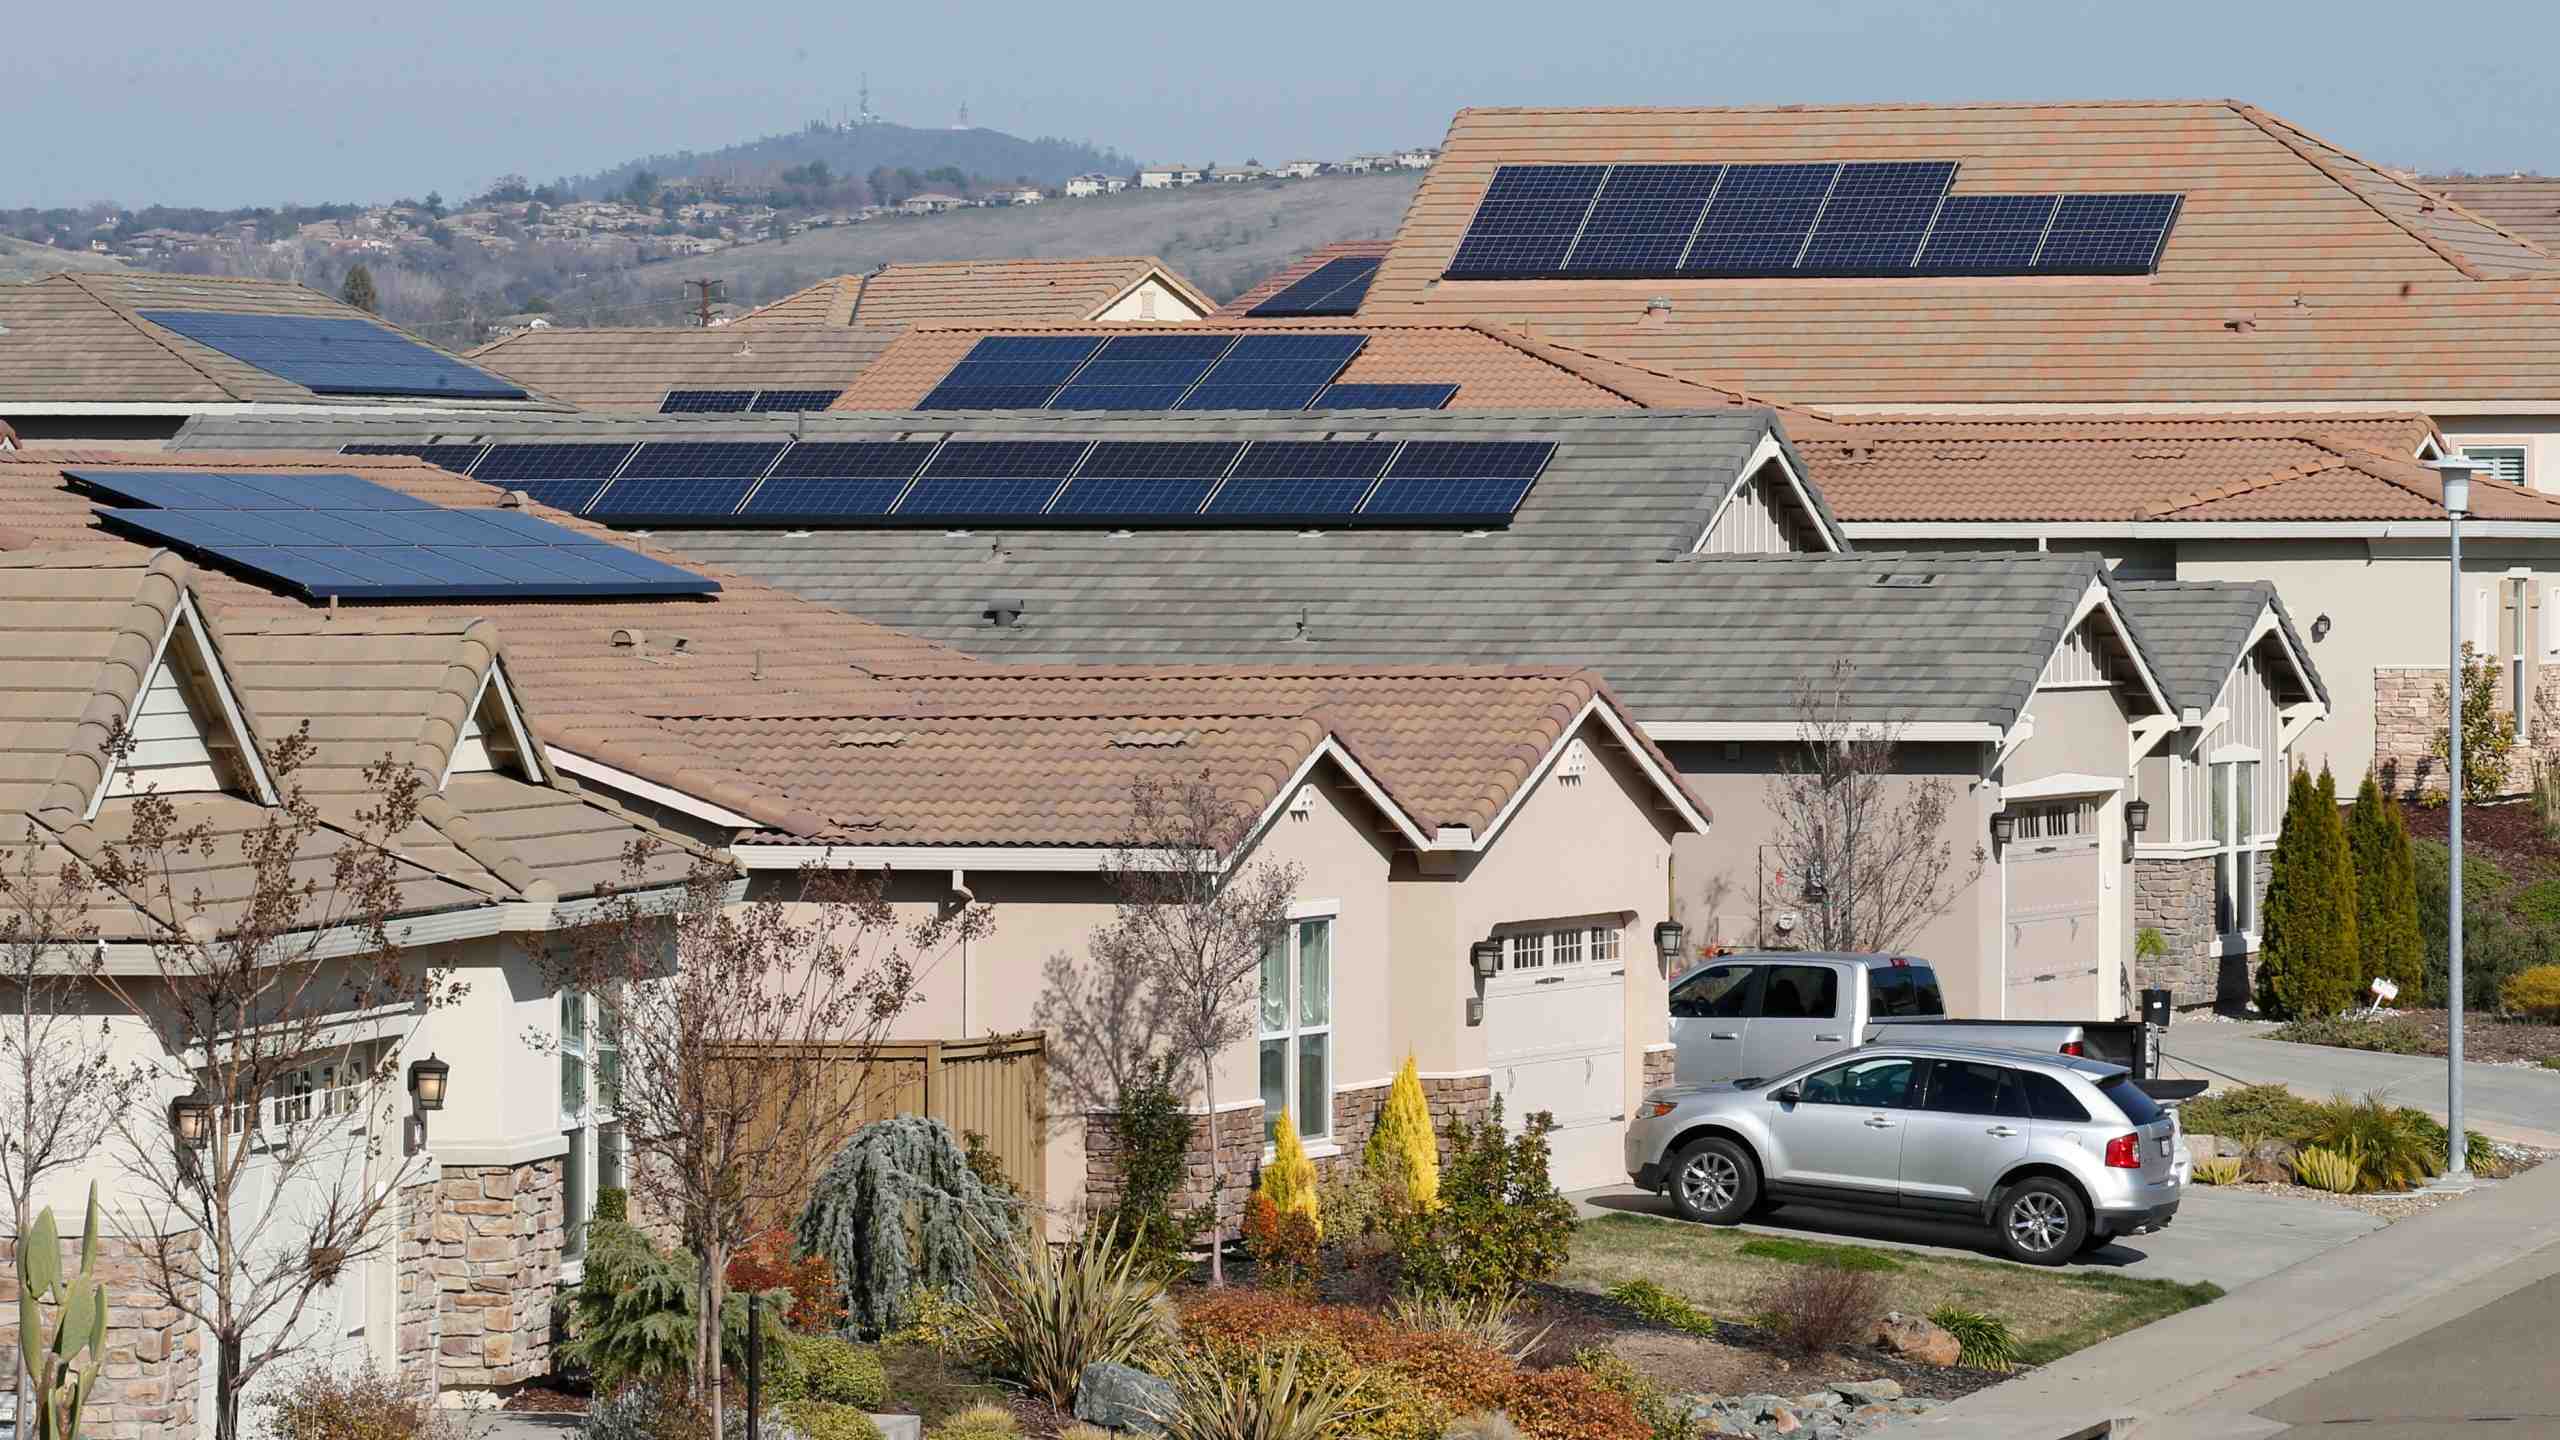 What is the dead load of solar panels?